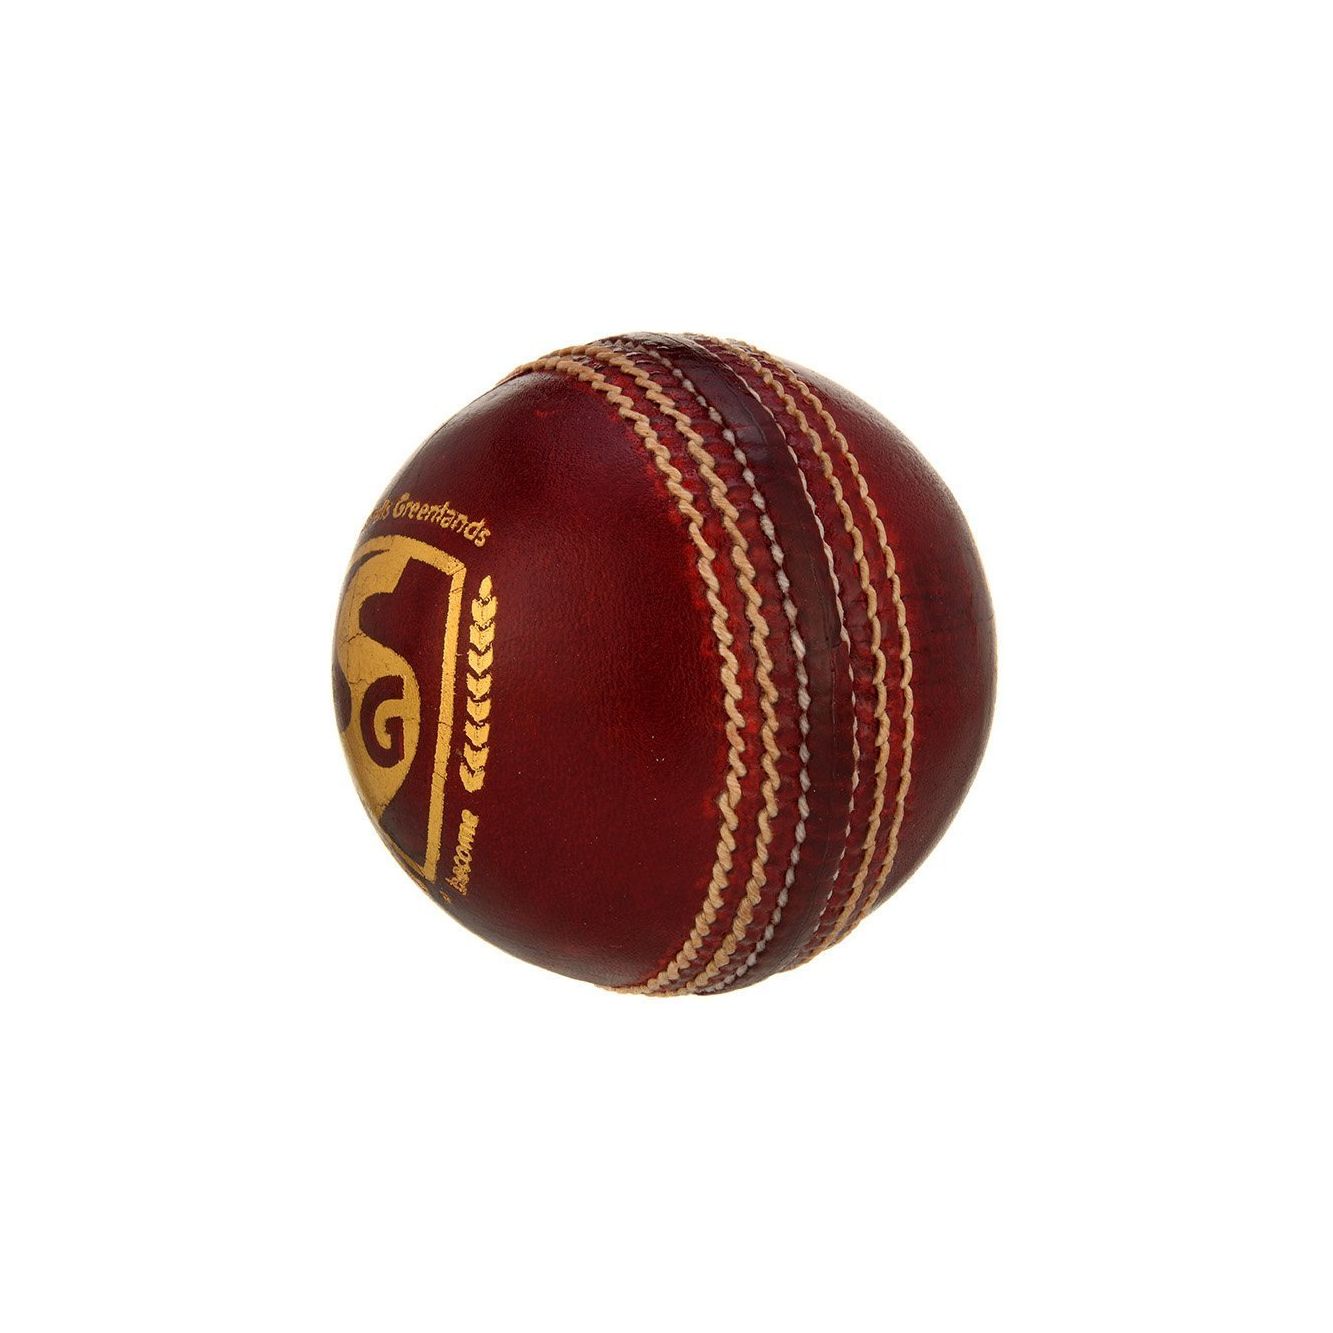 SG Test LE Most Premium Quality Conventional Cricket Leather Ball (Red)